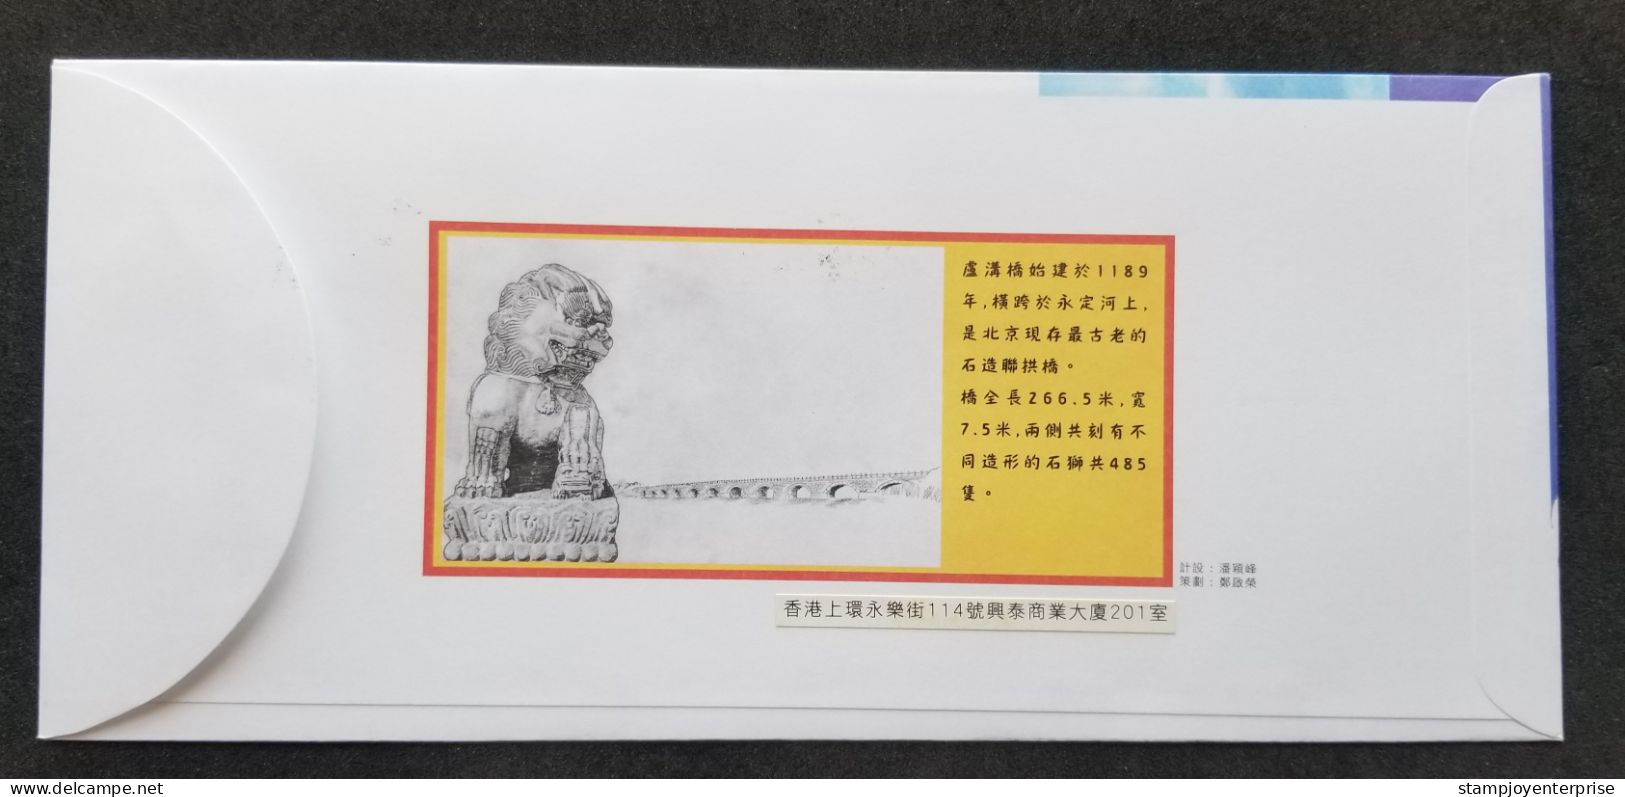 Hong Kong 70th Anniversary Marco Polo Bridge Incident 1937 - 2007 War Lion Stone (FDC) *rare - Covers & Documents